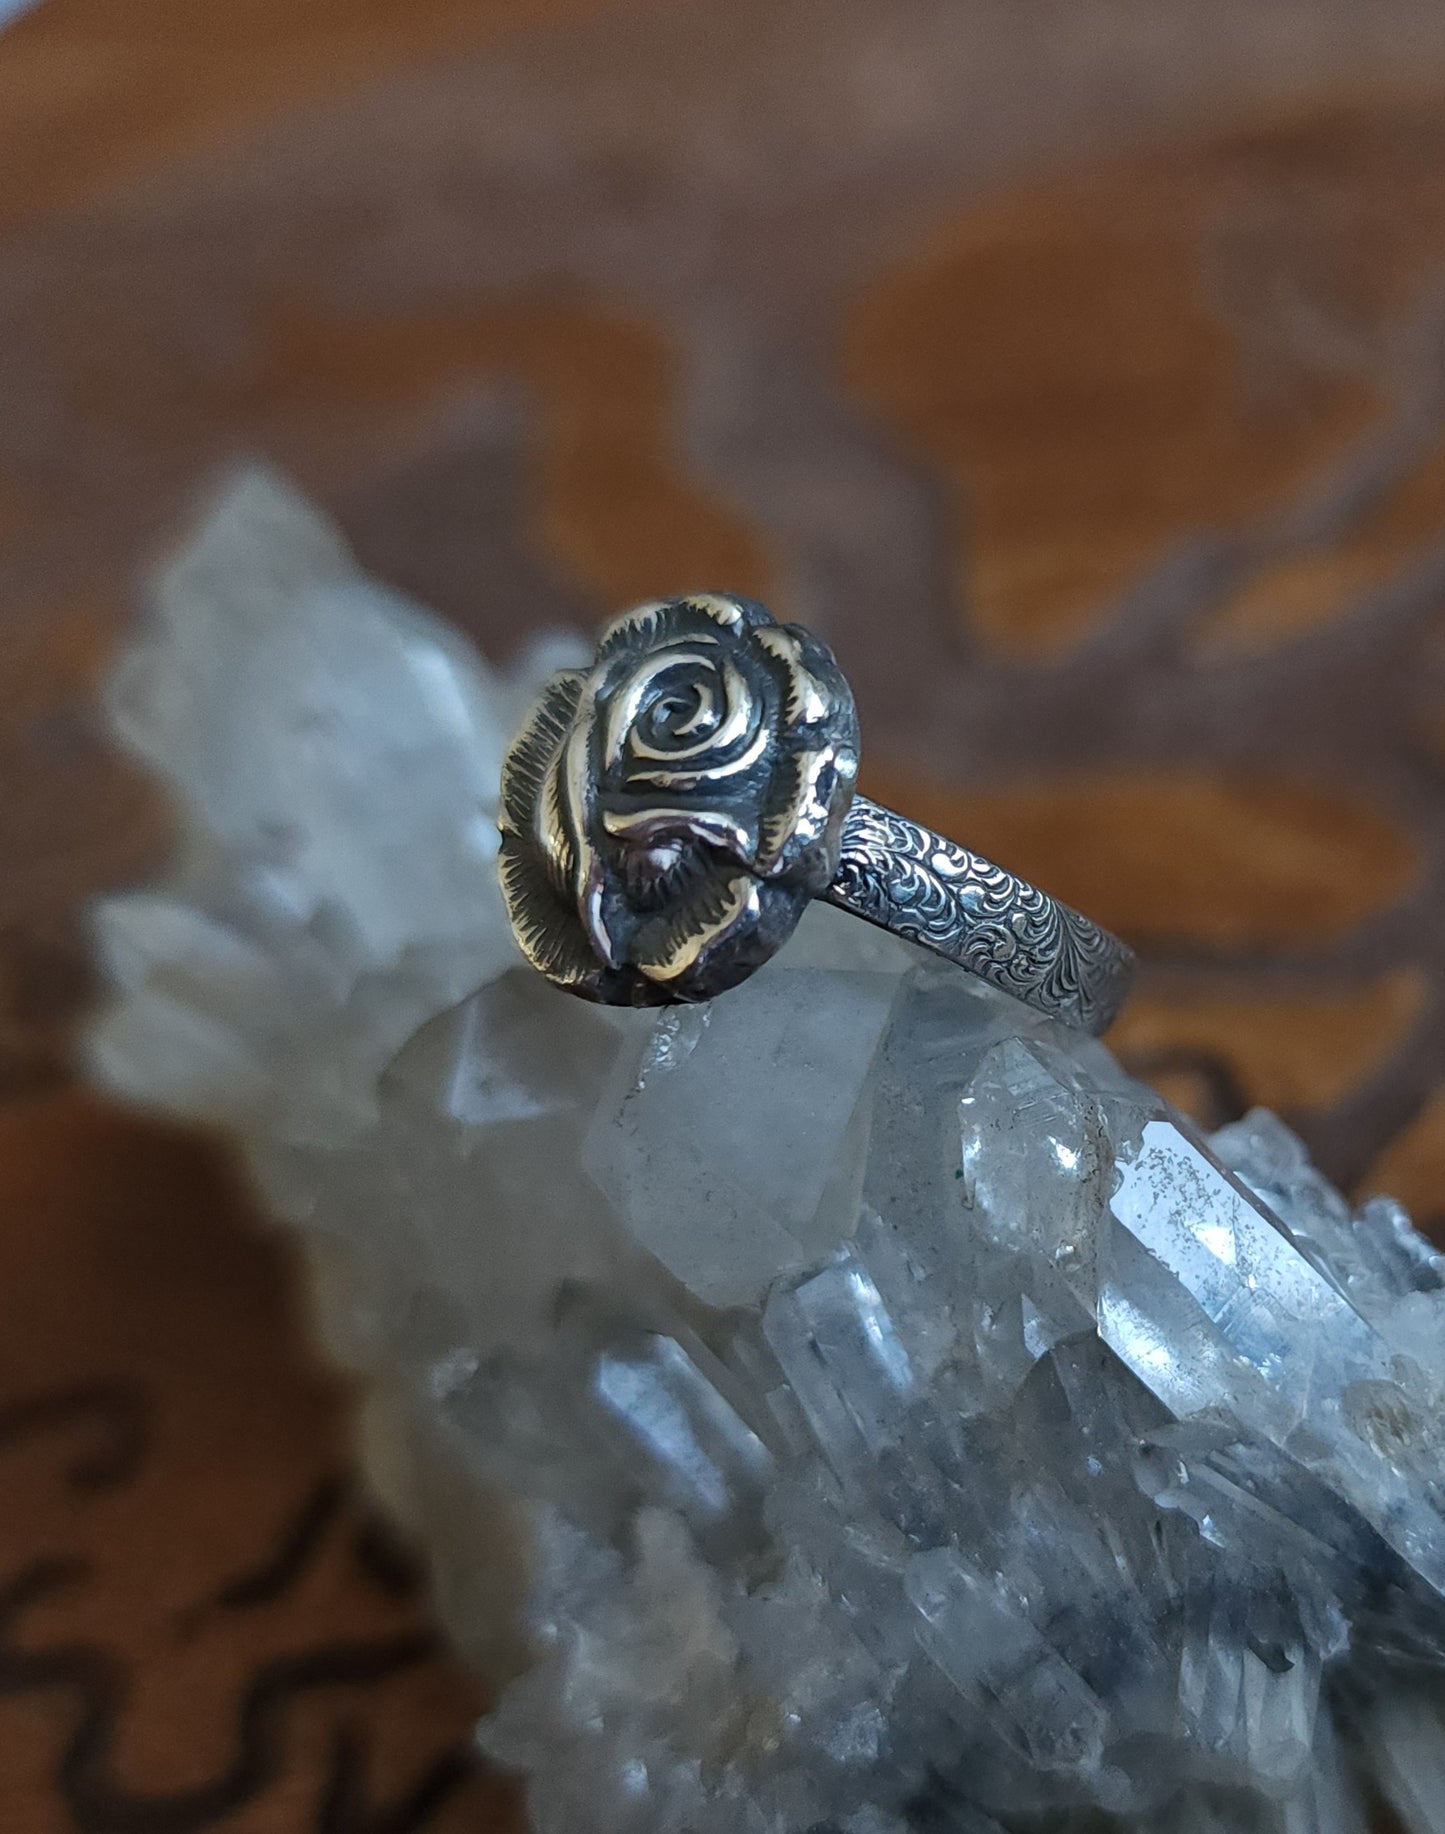 Sterling Silver Rose Ring - Size 8